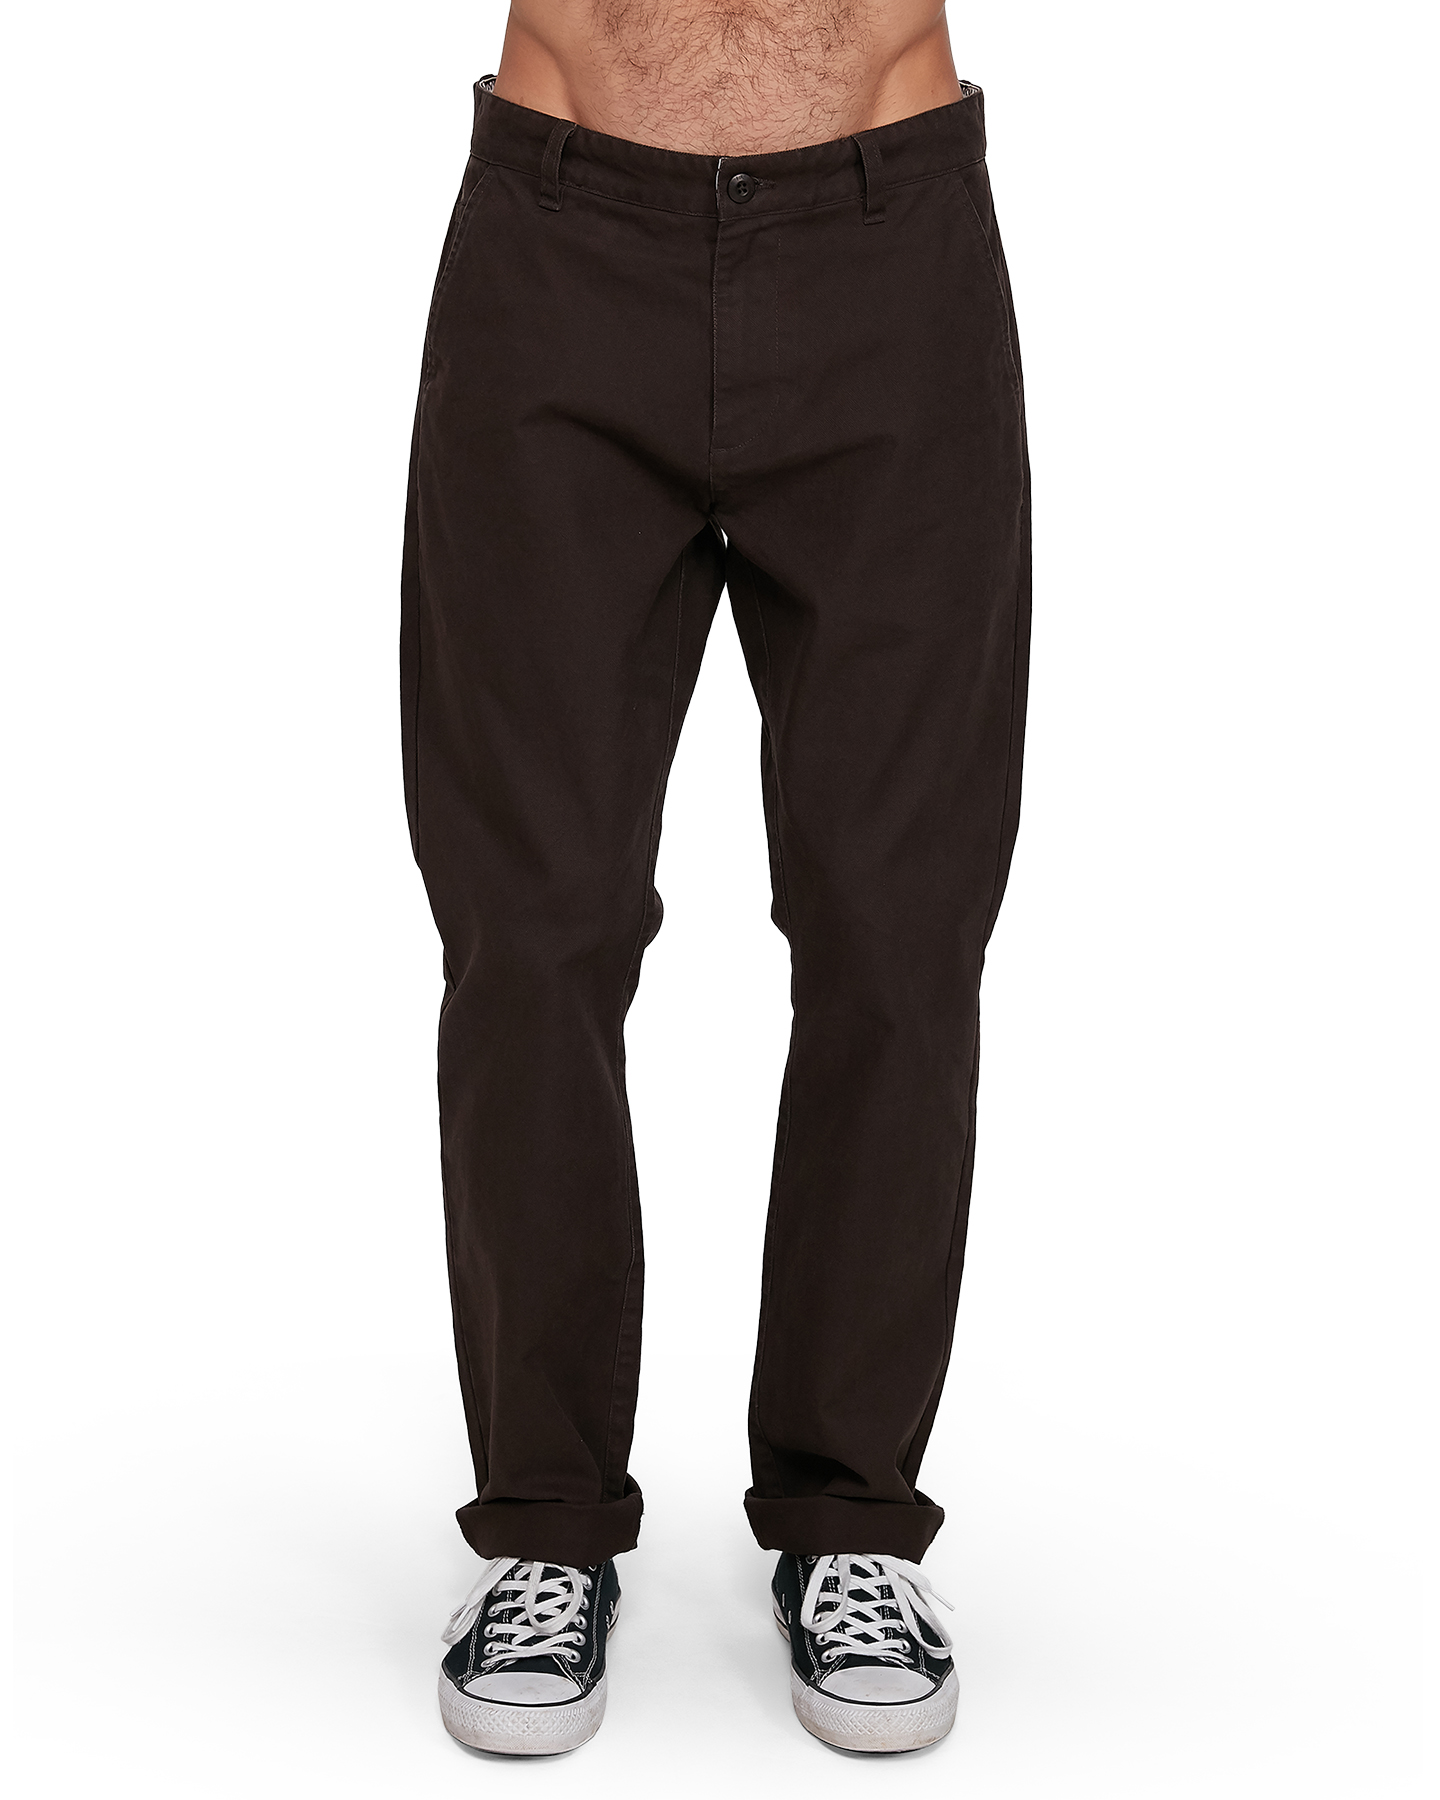 Element Midtown Pants - Chocolate To | SurfStitch